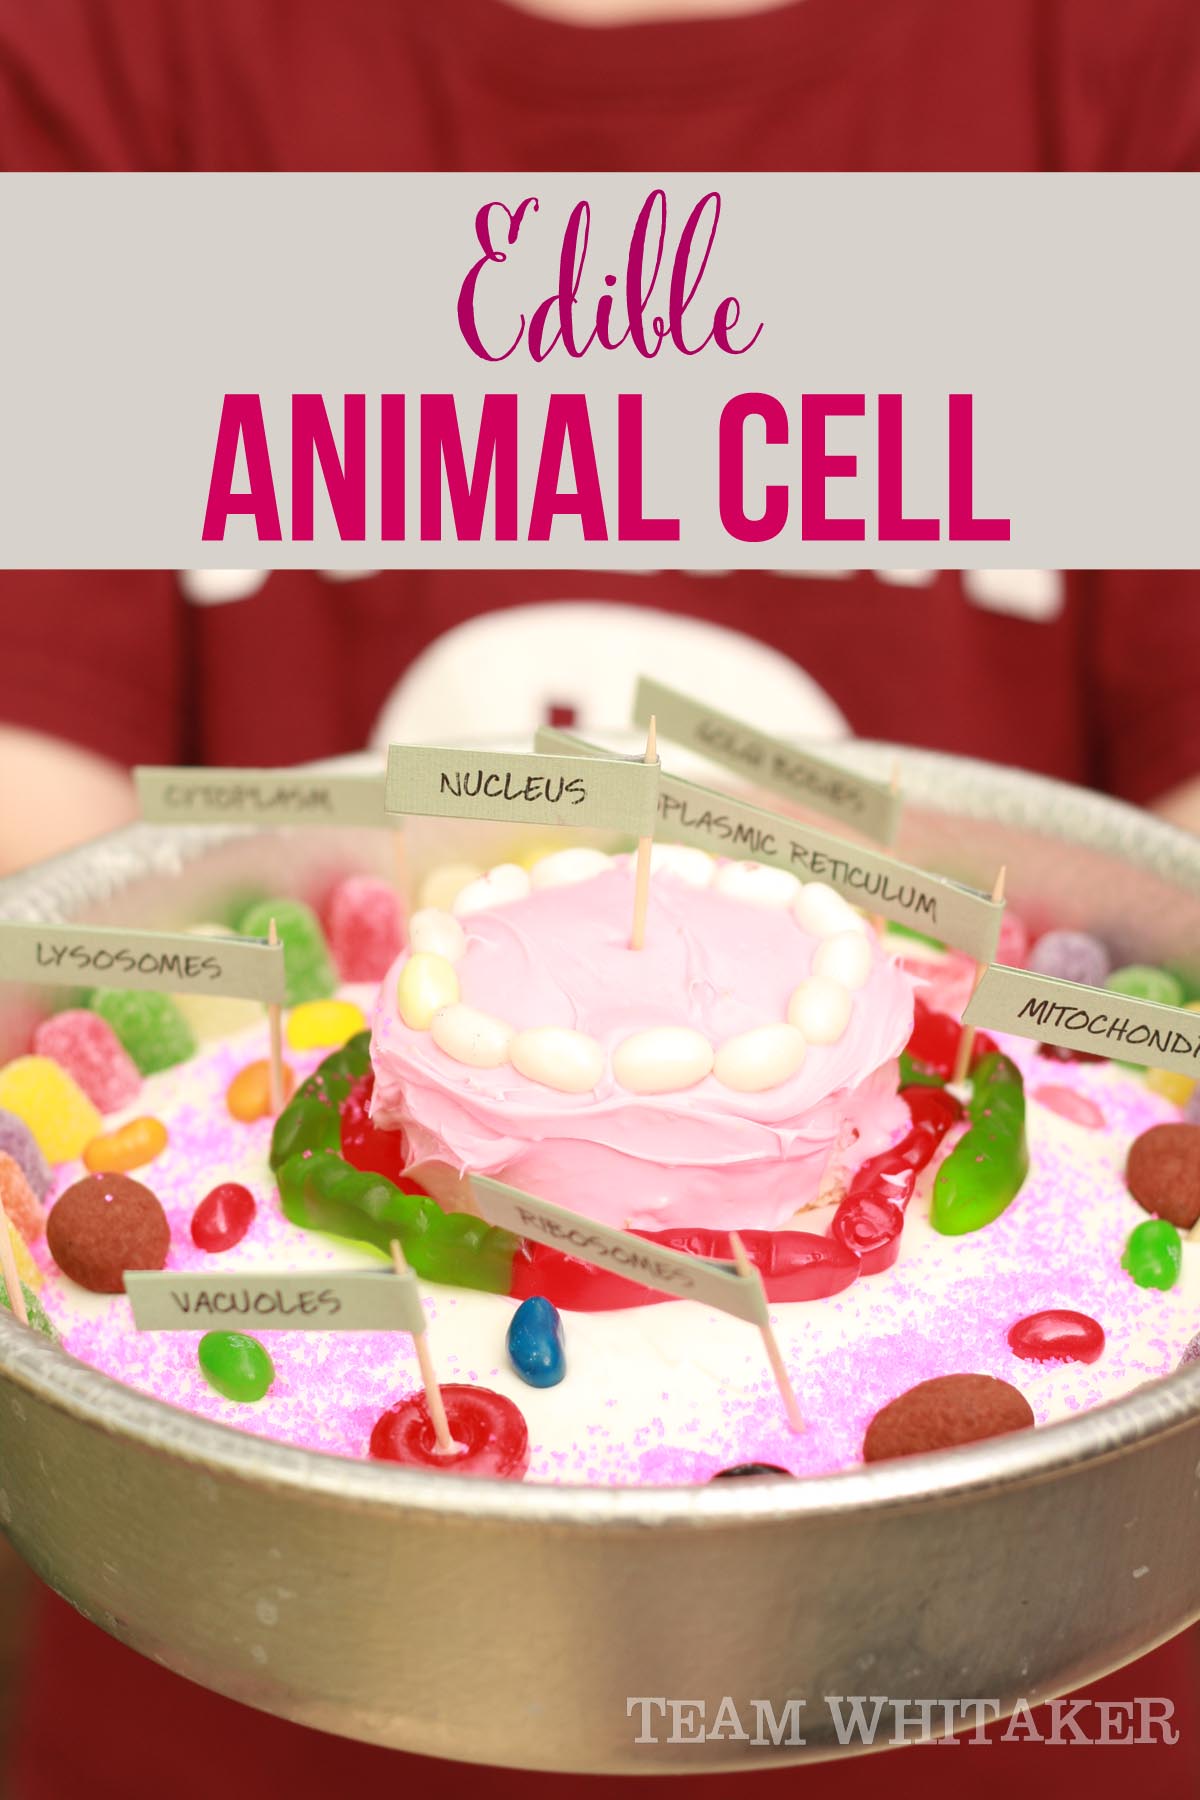 Have a middle schooler who has to recreate an edible animal cell? Grab a cake mix, some candy and frosting and call it done!